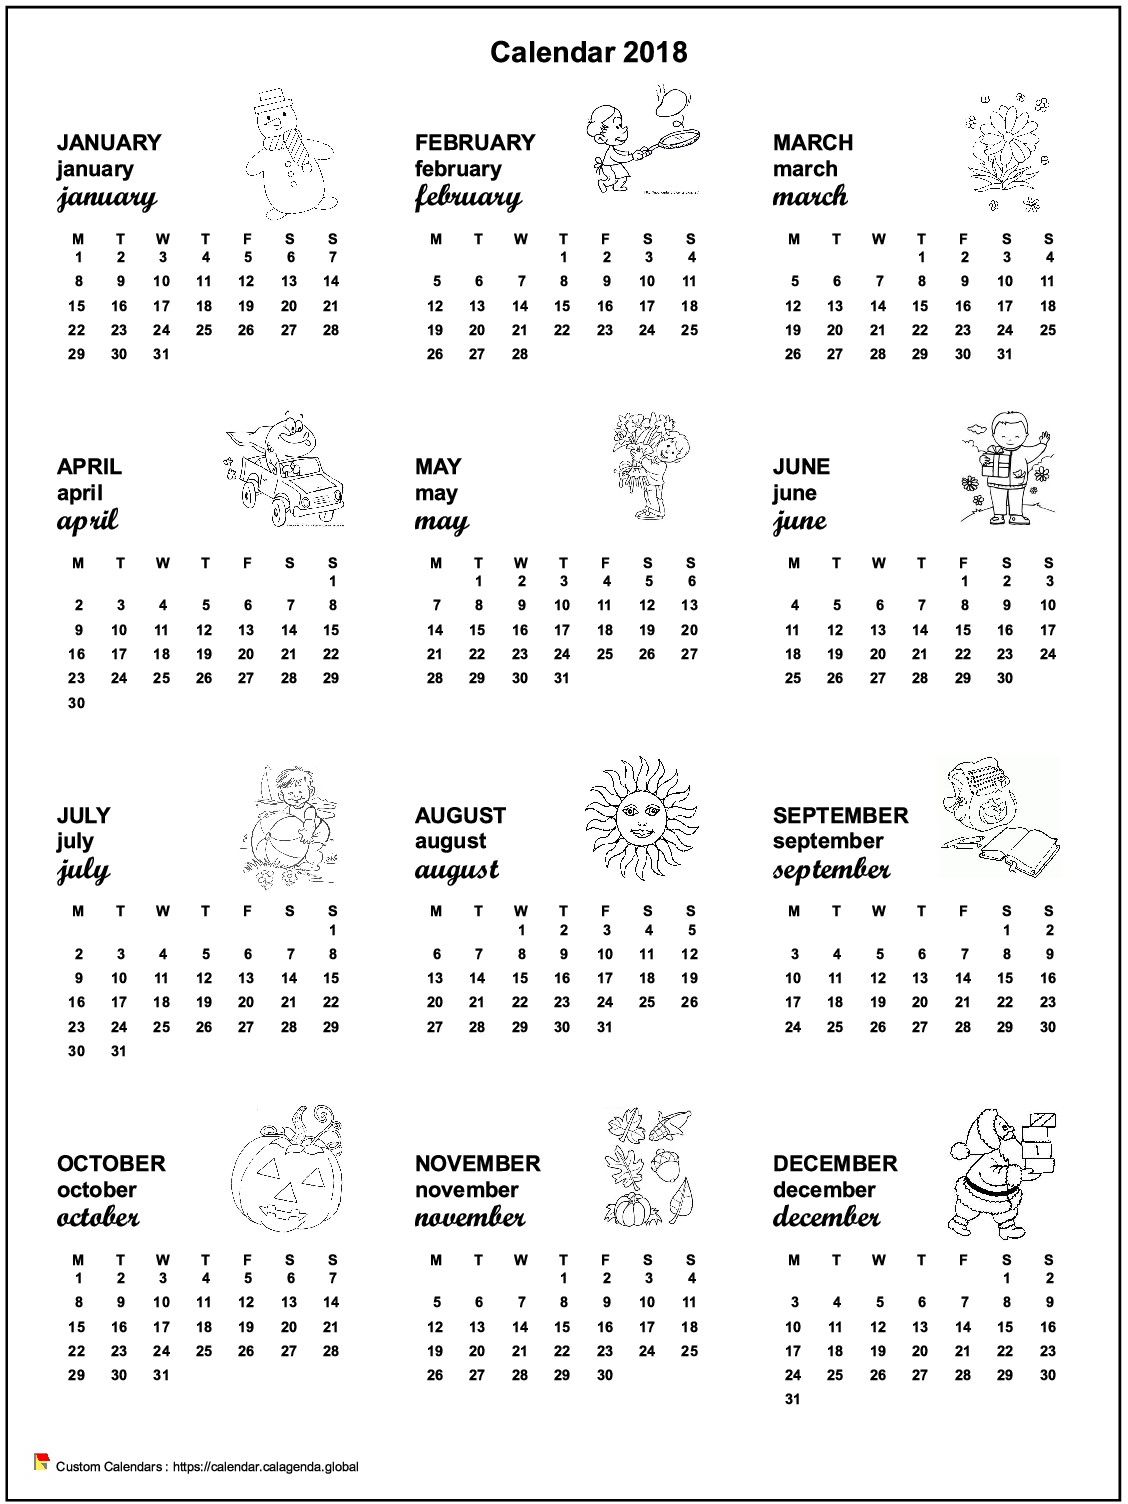 Calendar 2058 annual maternal and primary school